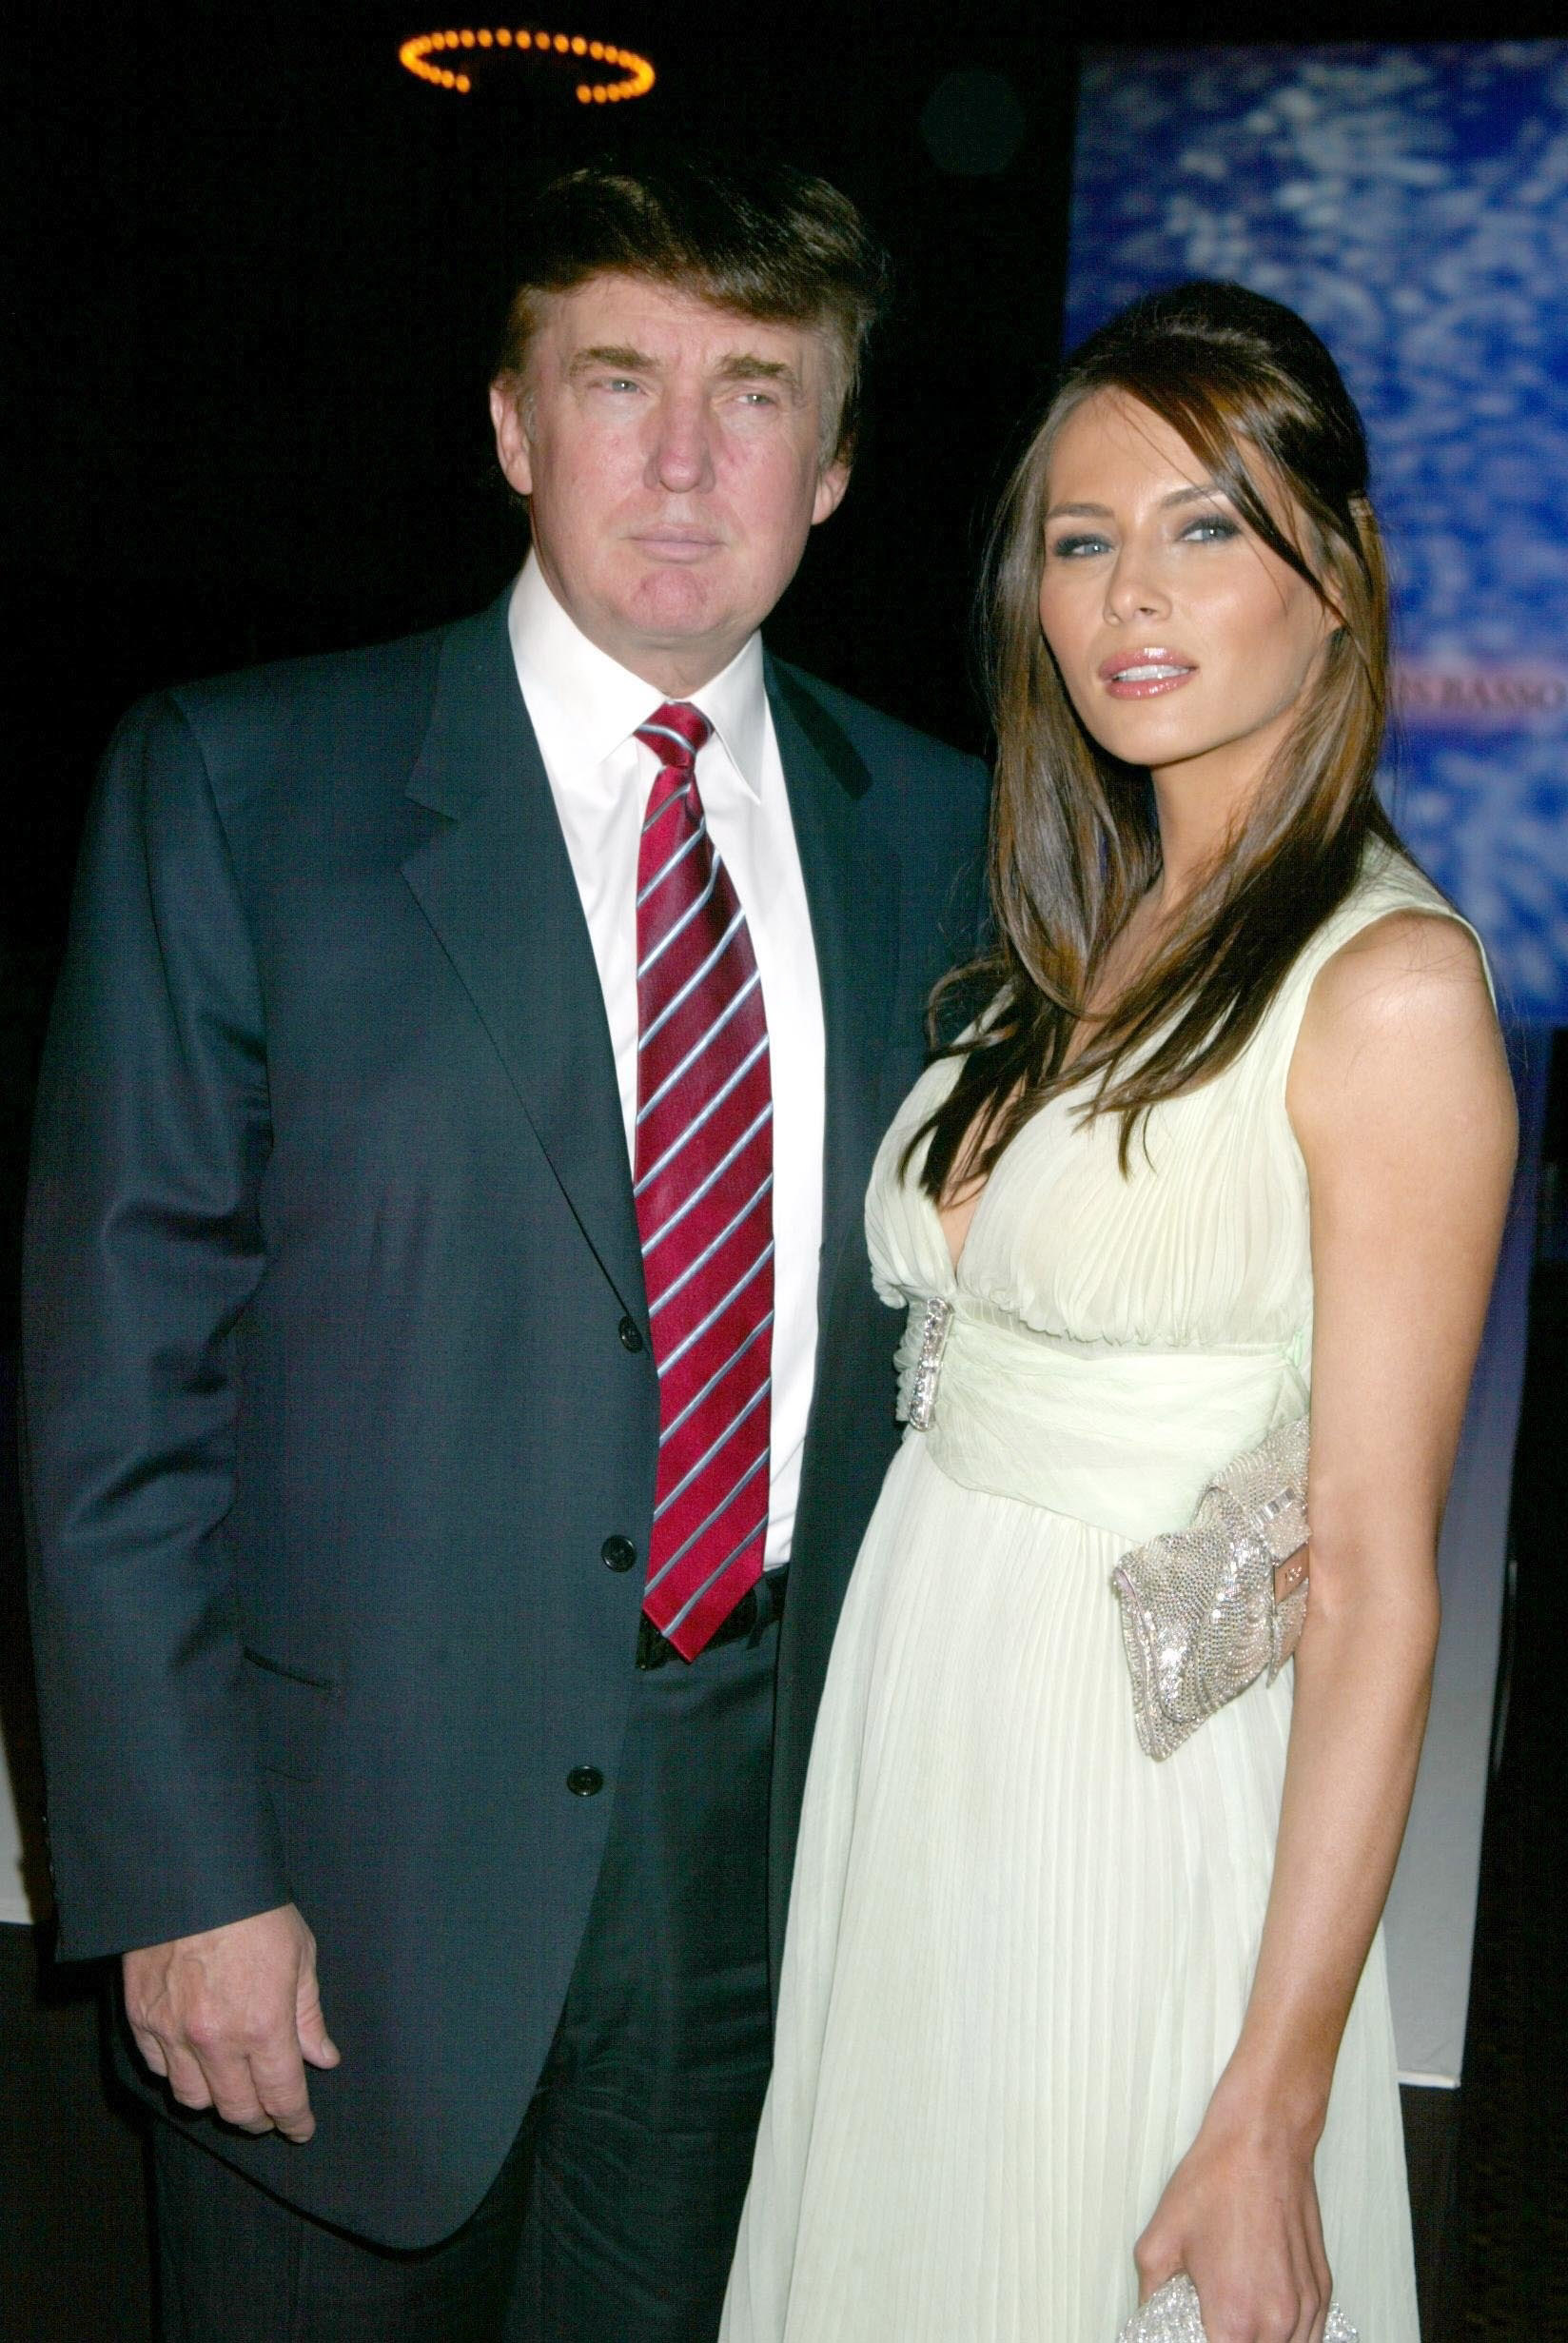 DONALD TRUMP AND MELANIA KNAUSS during DENNIS BASSO'S 2003 TWENTIETH ANNIVERSARY COLLECTION at Cipriani 42nd Street in New York, New York, United States. (Photo by Sylvain Gaboury/FilmMagic)